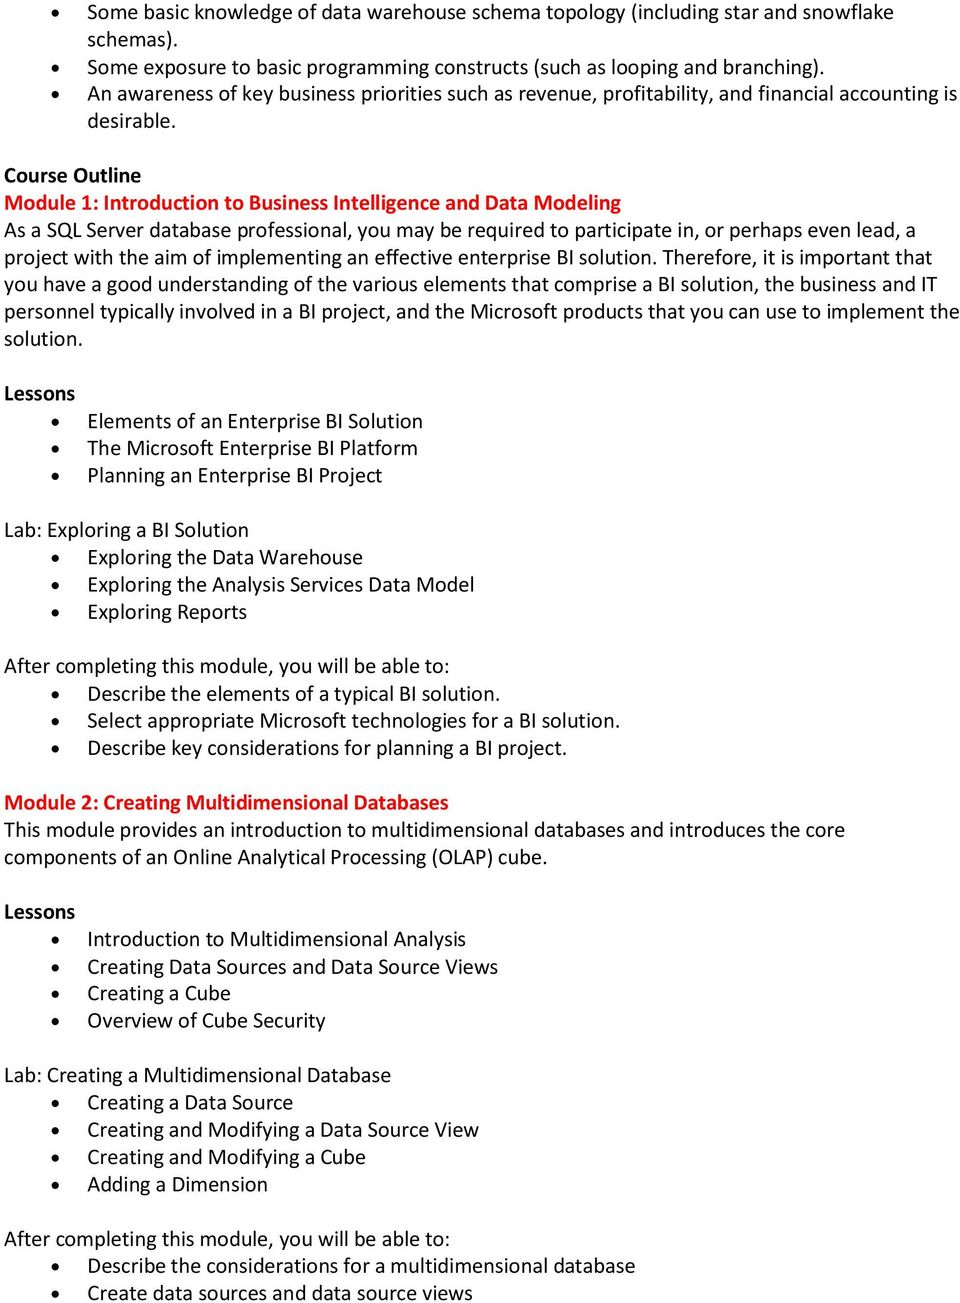 Course Outline Module 1: Introduction to Business Intelligence and Data Modeling As a SQL Server database professional, you may be required to participate in, or perhaps even lead, a project with the